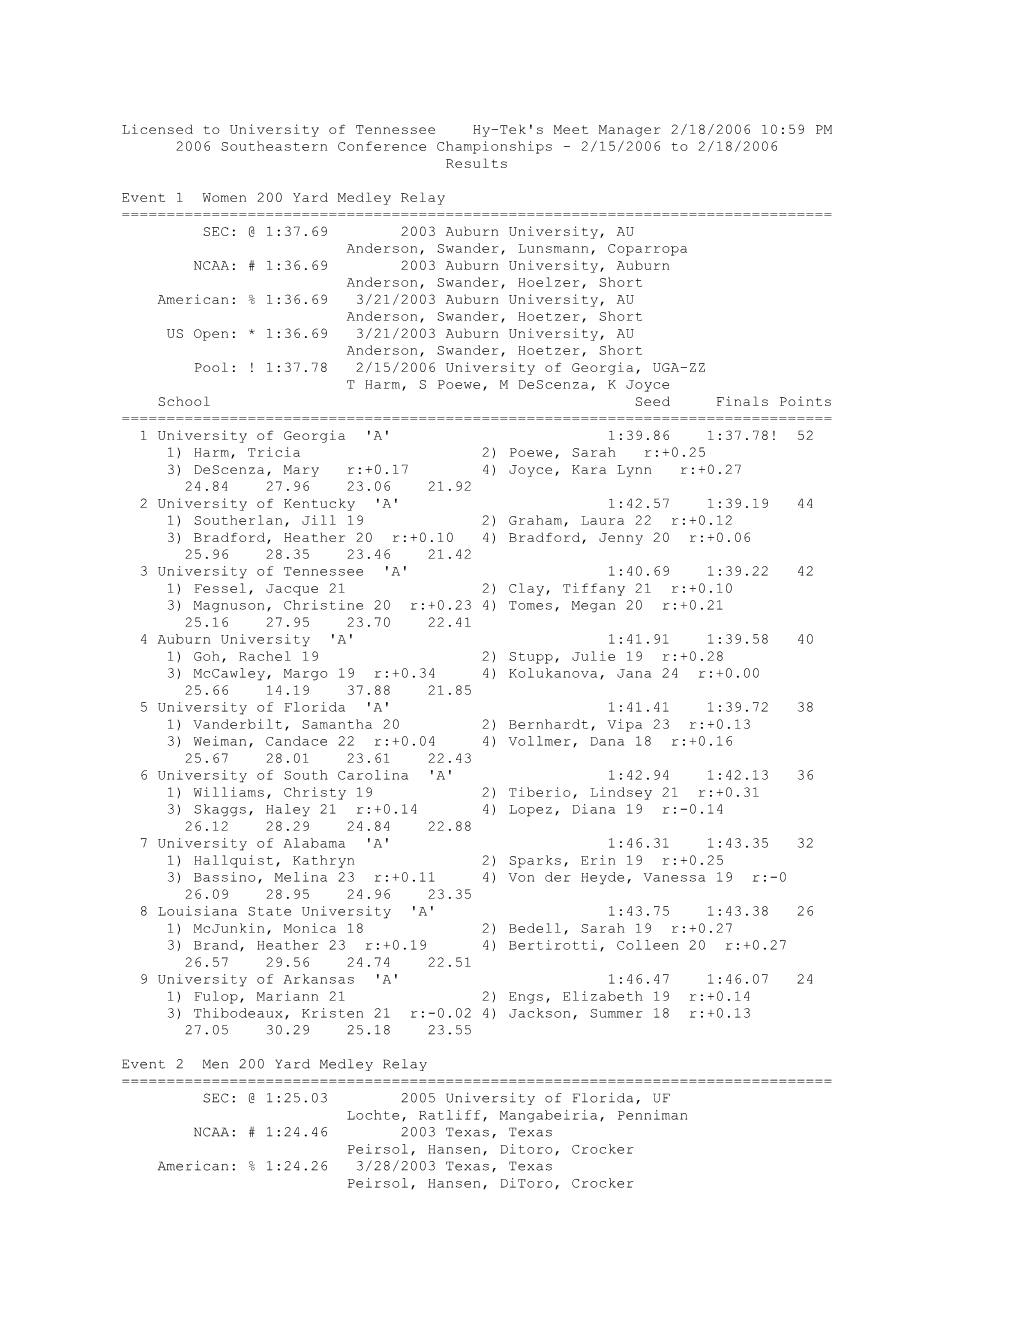 Licensed to University of Tennessee Hy-Tek's Meet Manager 2/18/2006 10:59 PM 2006 Southeastern Conference Championships - 2/15/2006 to 2/18/2006 Results